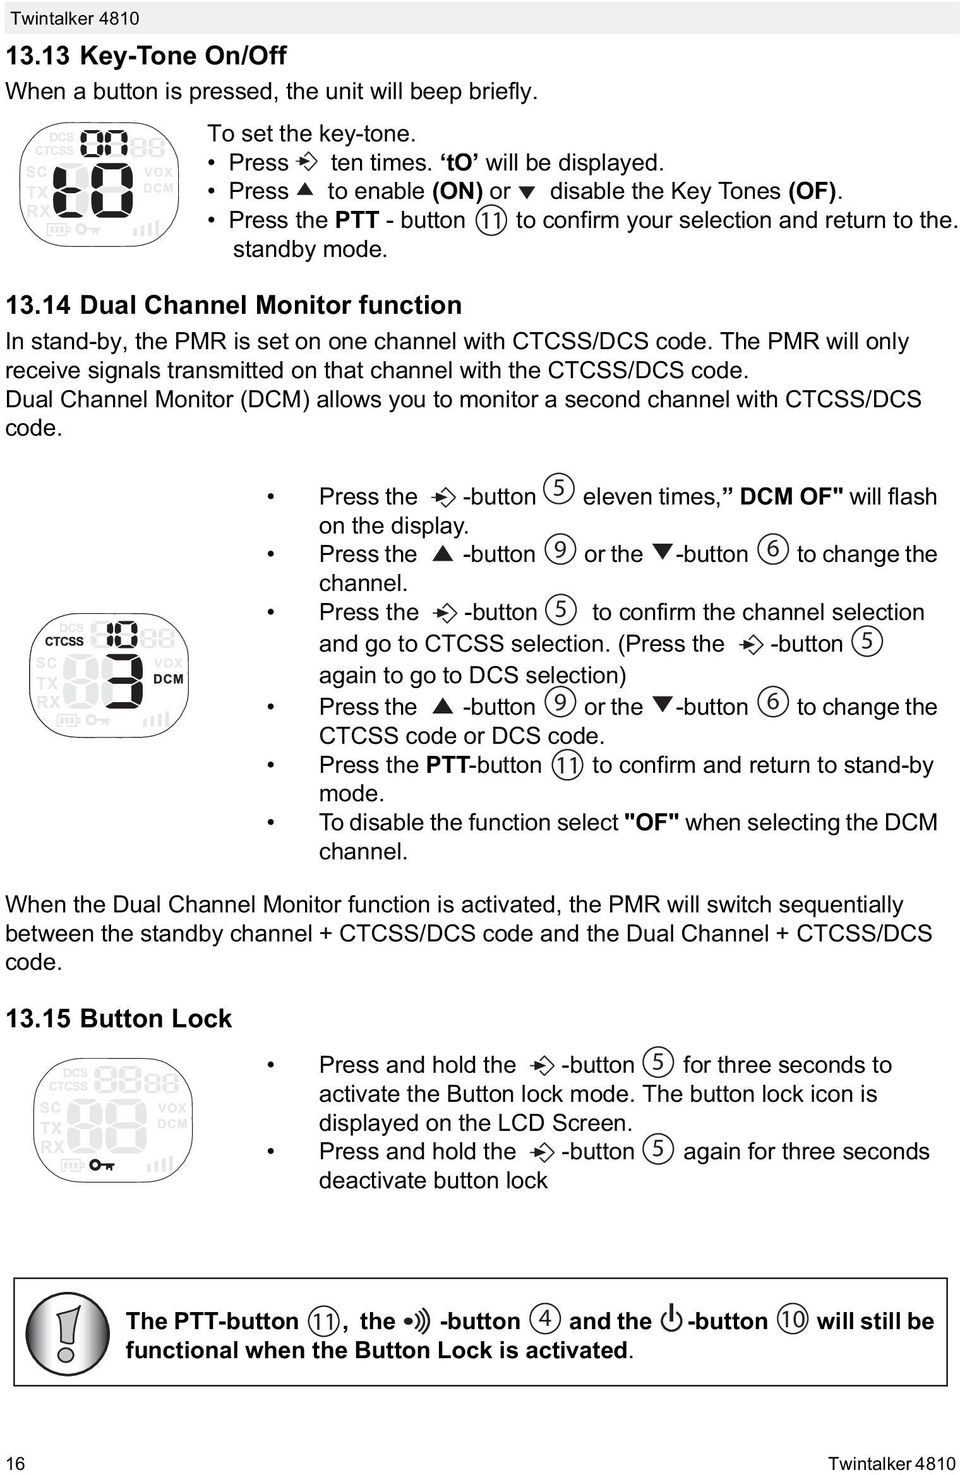 The PMR will only receive signals transmitted on that channel with the CTCSS/DCS code. Dual Channel Monitor (DCM) allows you to monitor a second channel with CTCSS/DCS code.